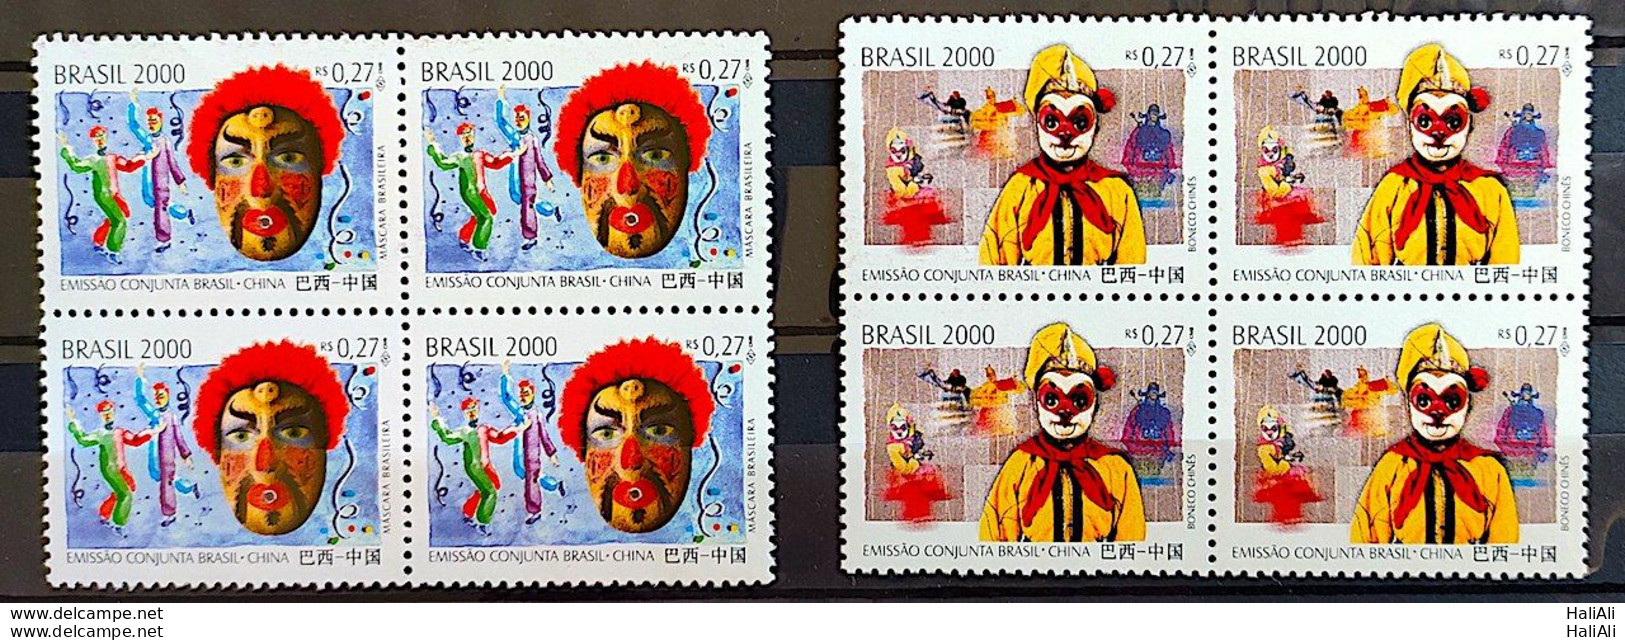 C 2343 Brazil Stamp Joint Issue Brazil China Mask 2000 Block Of 4 - Neufs